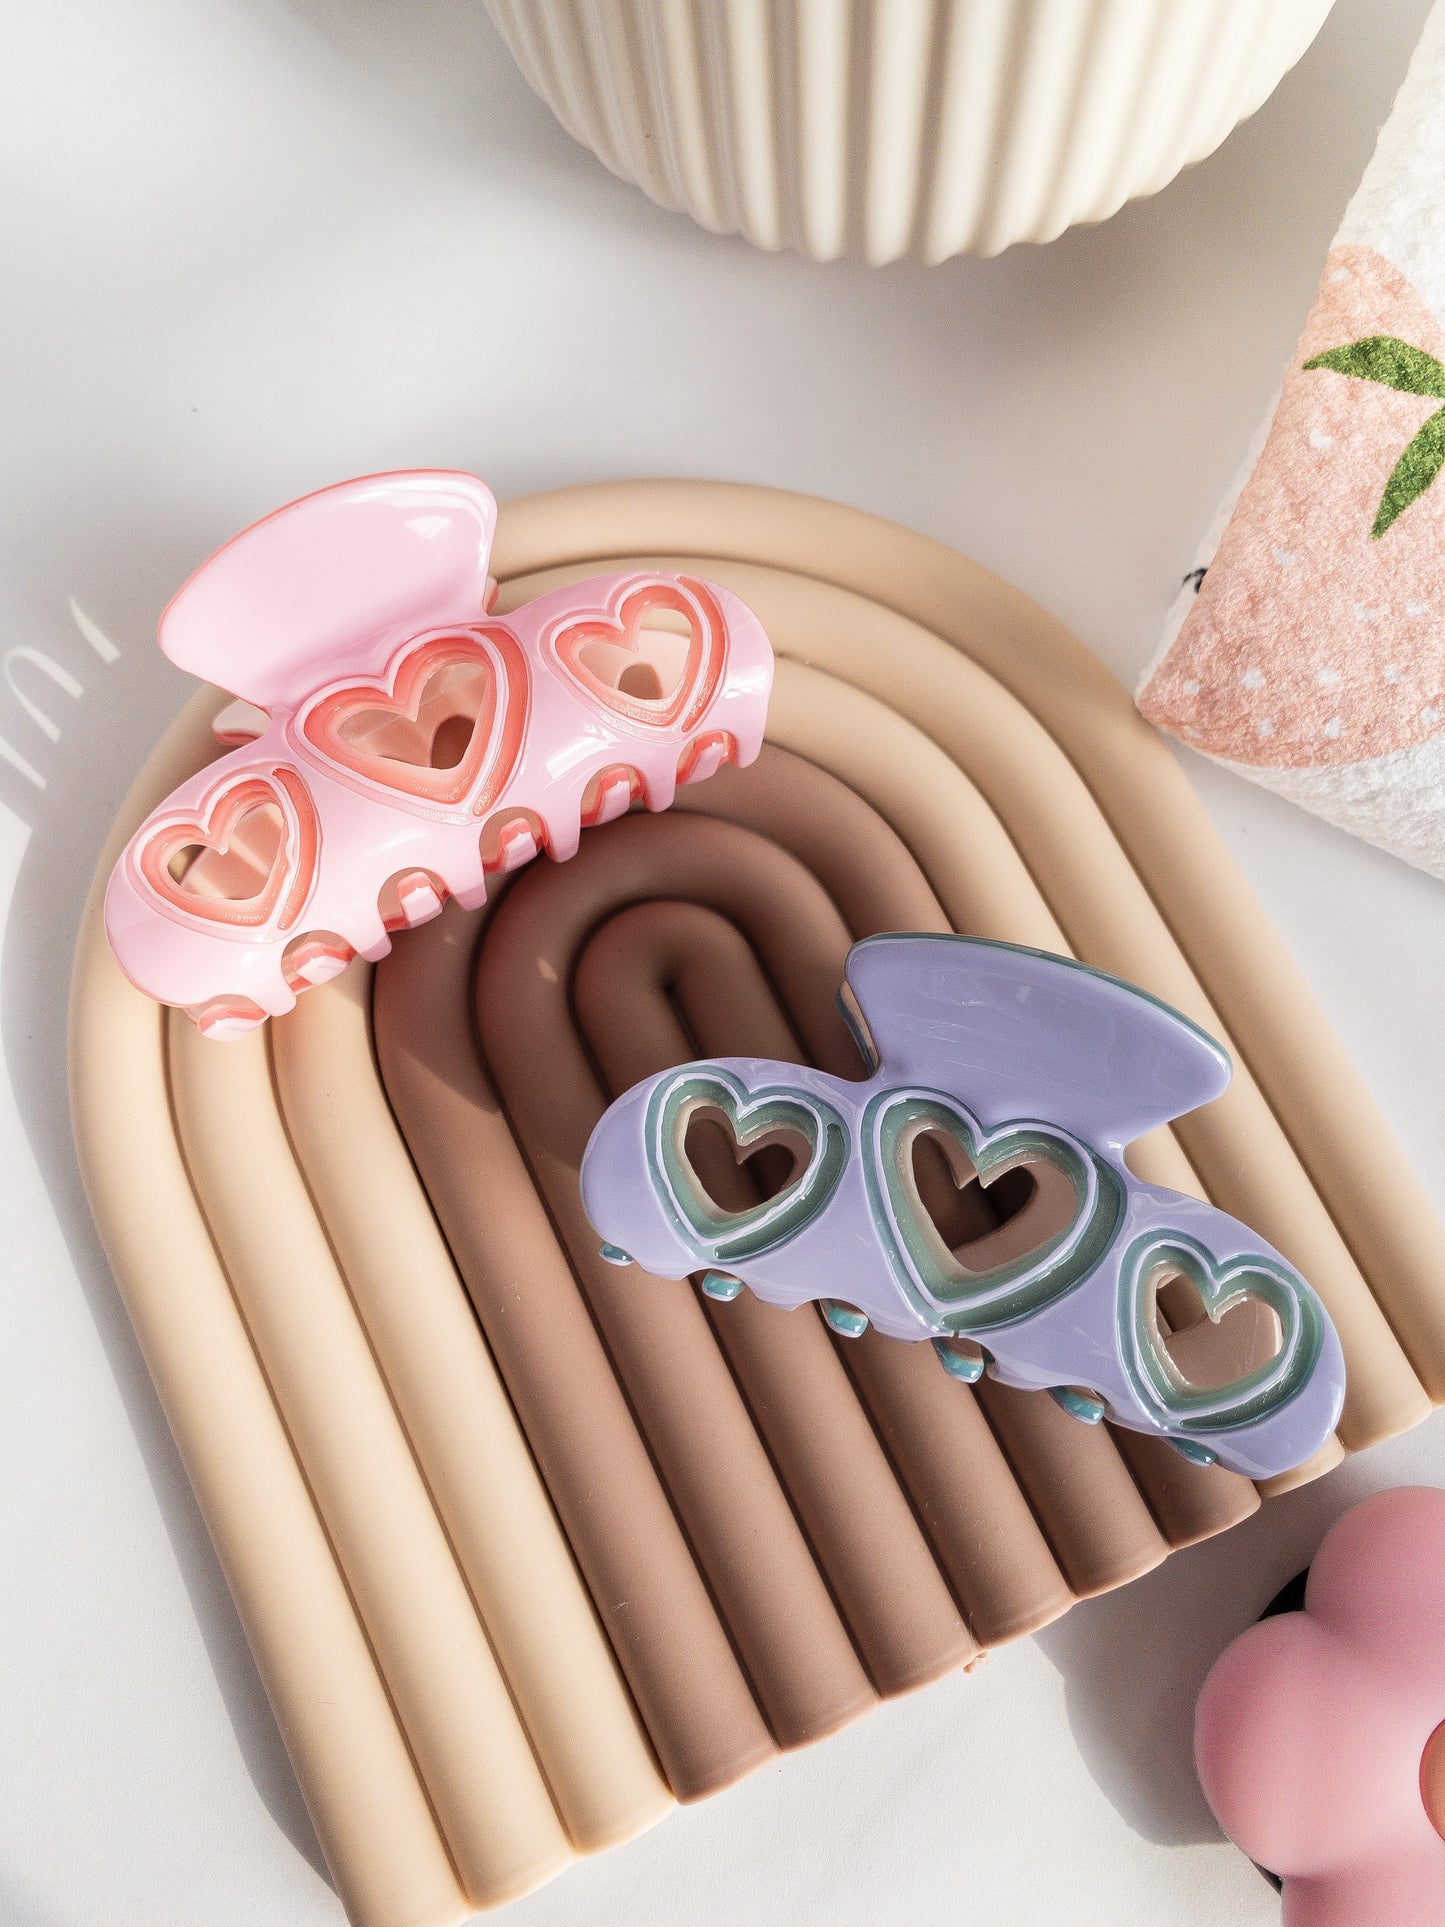 The hair claw clip for the sweethearts. The perfect medium size for half up hairstyles, strong and durable. Your hair is highlighted by the cut out hearts on each side. A beautiful sweet tart jam purple color with a lighter teal outline throughout. 